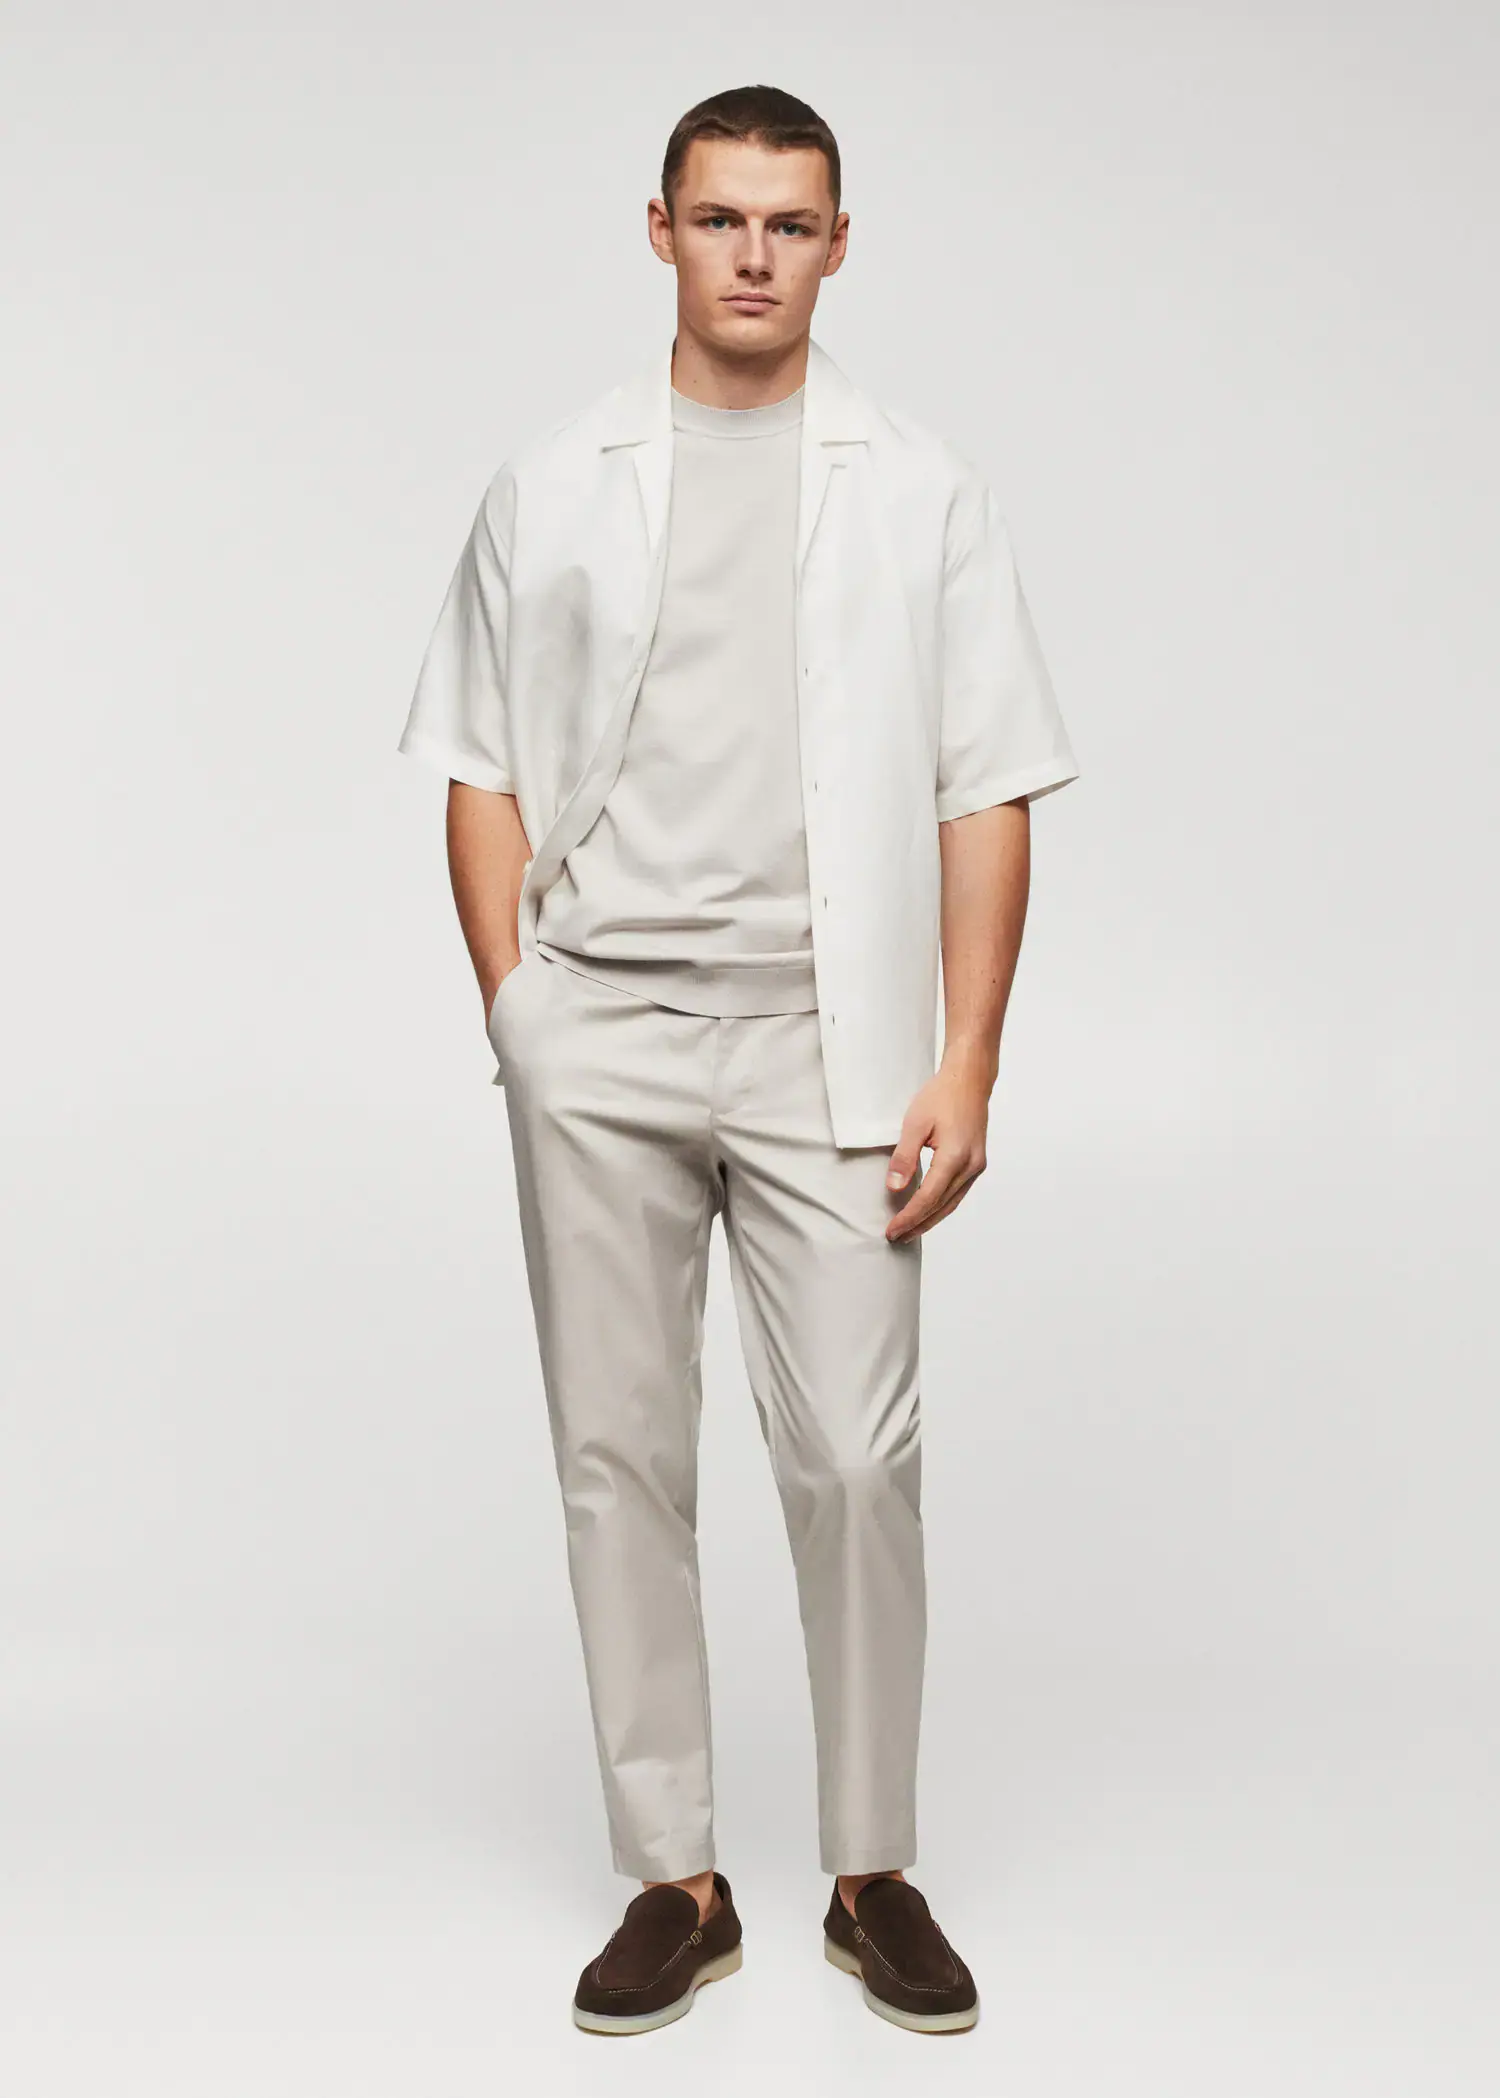 Mango Fine-knit T-shirt. a man in a white shirt and jacket 